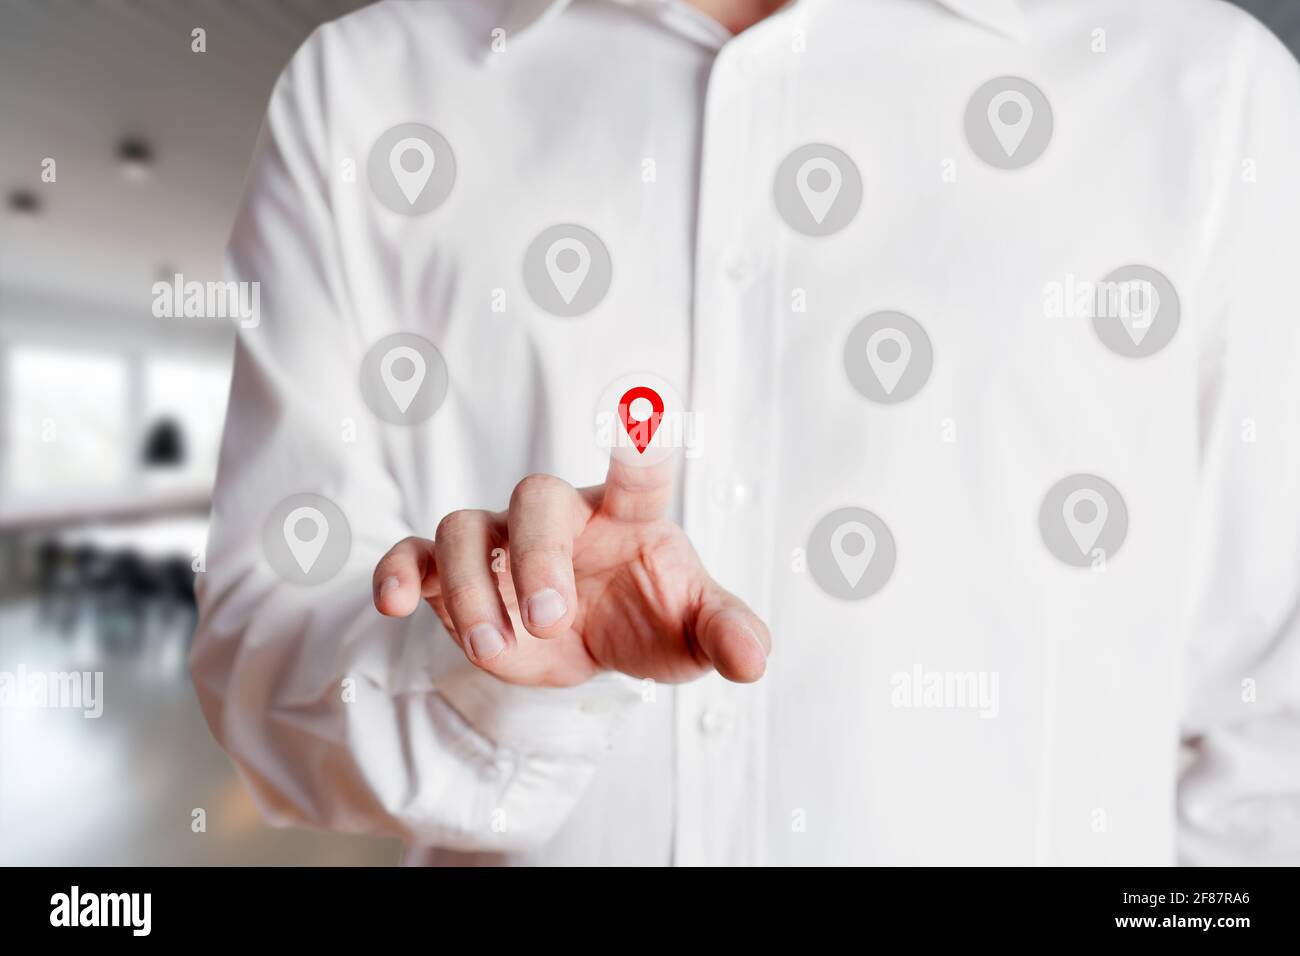 Businessman presses on and selects a location or map pin icon on virtual touch screen. Map pointer navigation concept Stock Photo